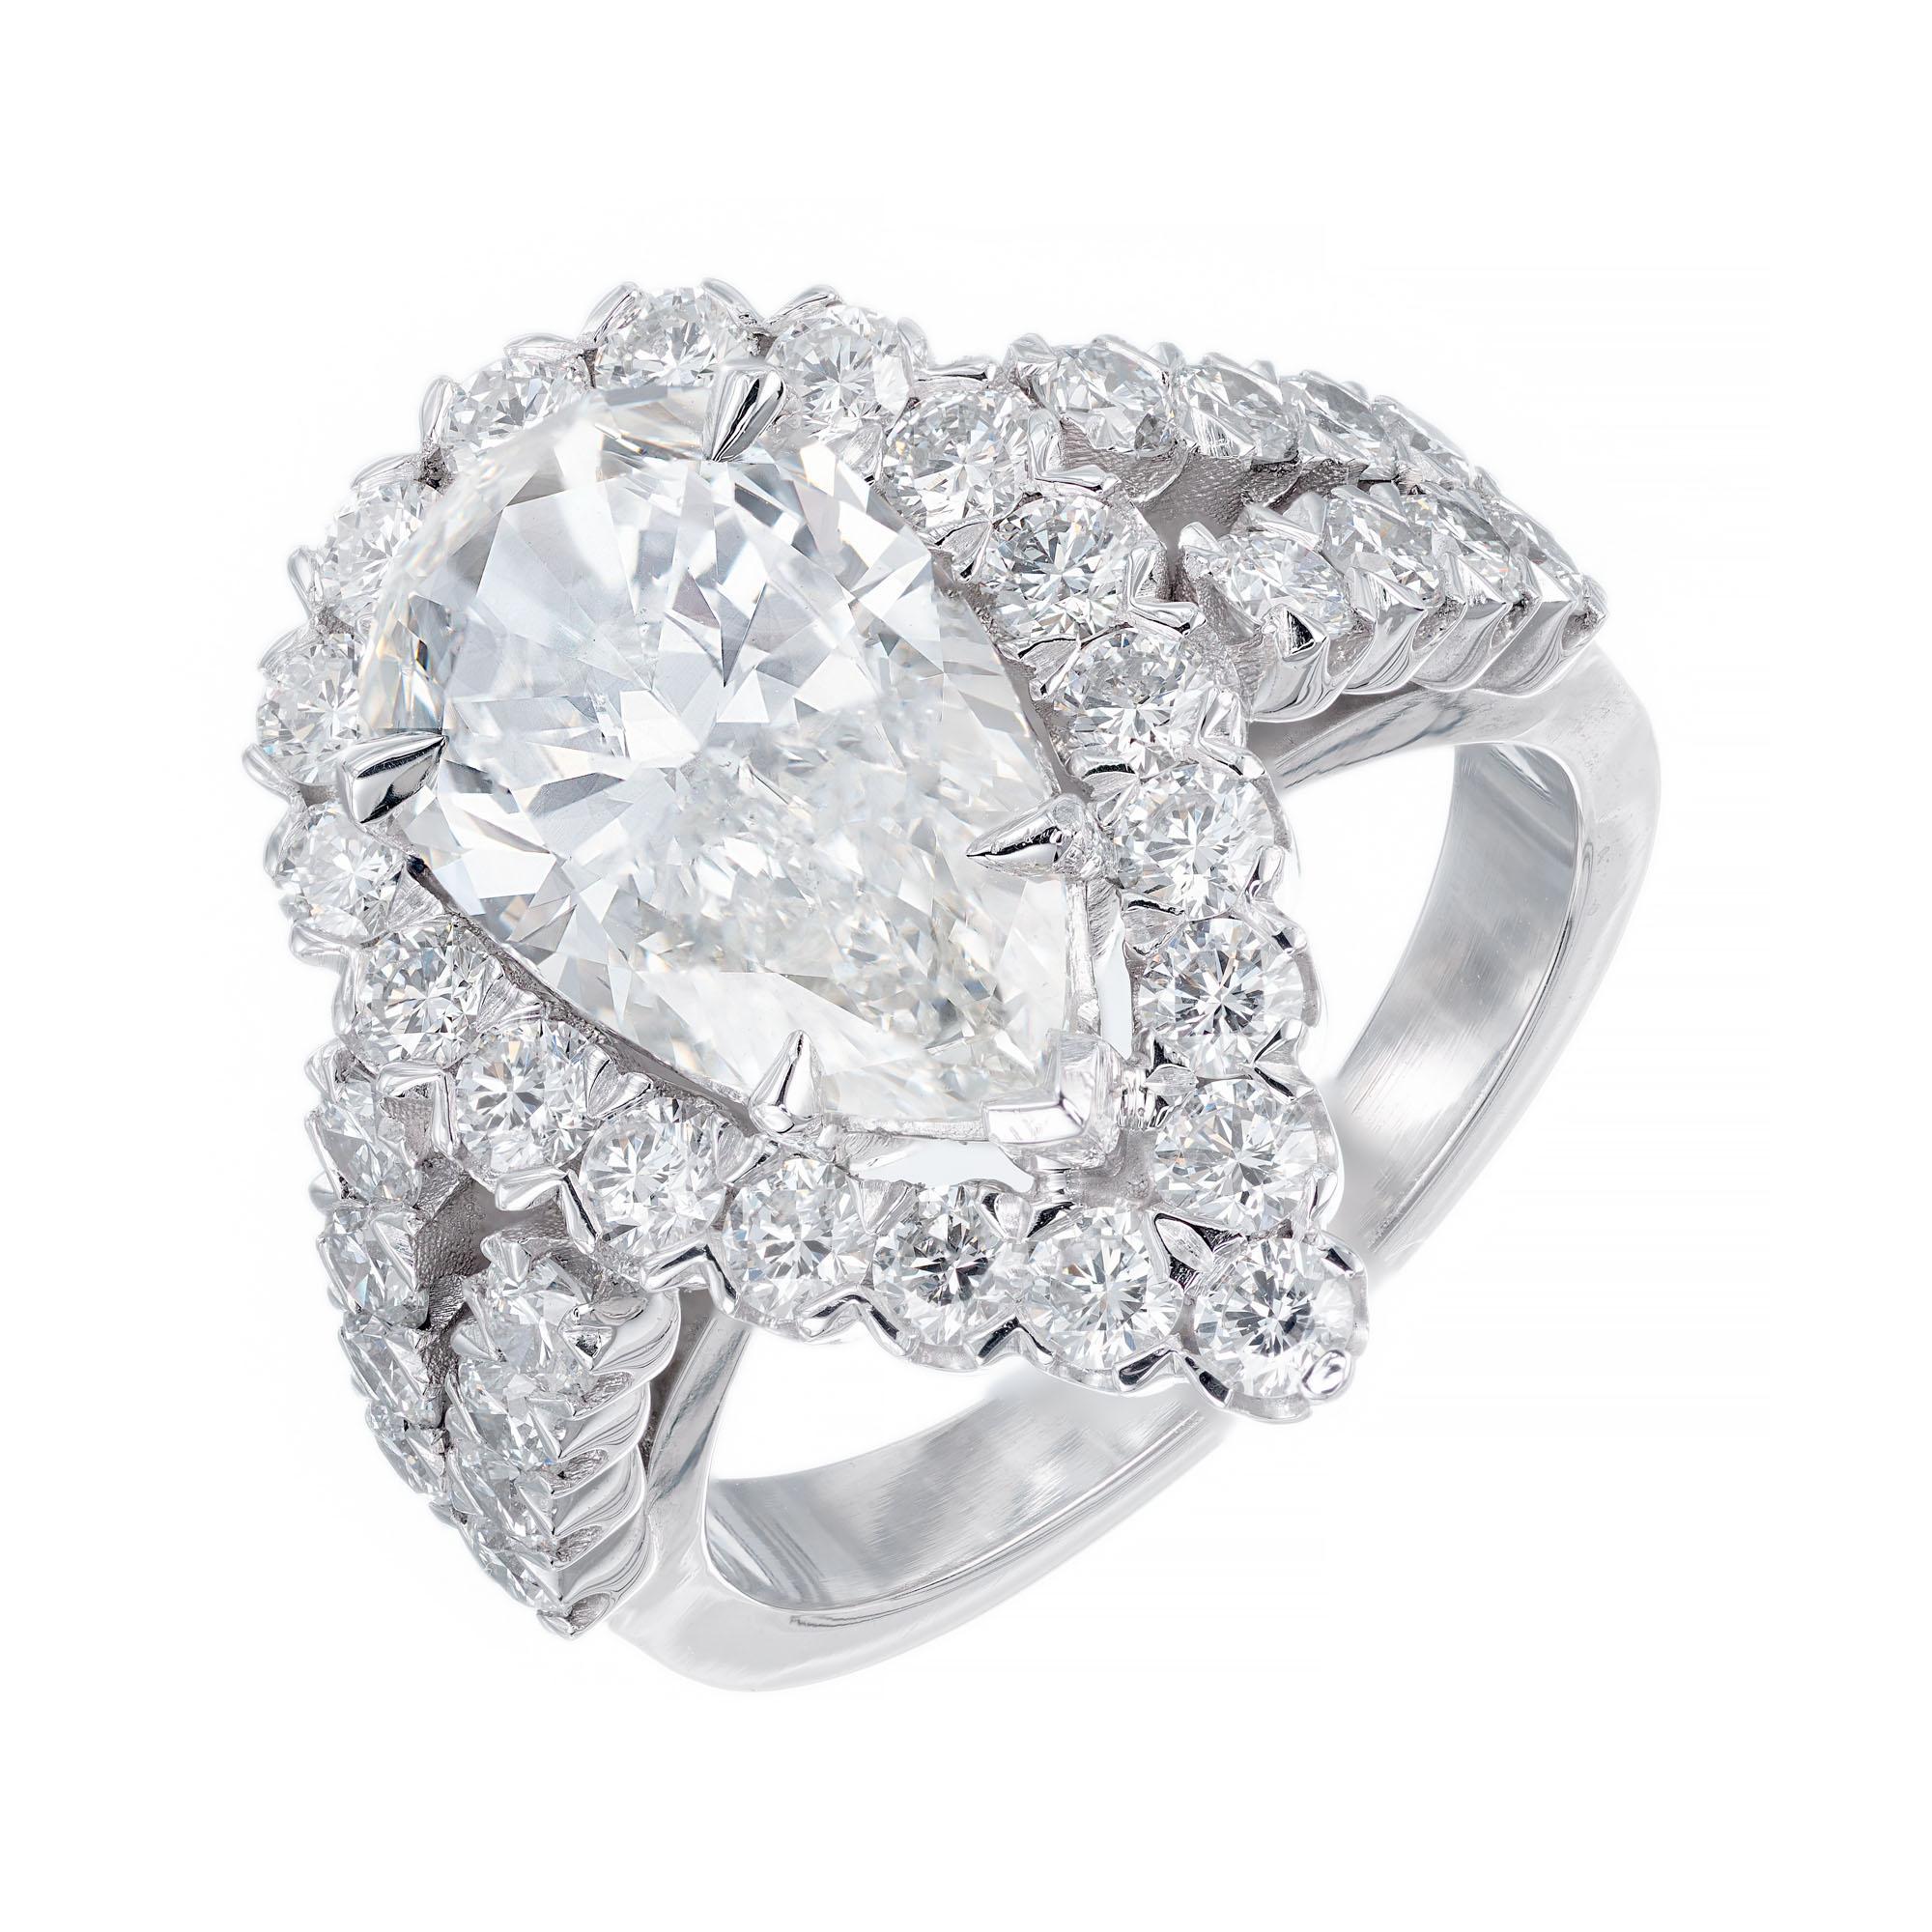 Peter Suchy custom design 2.96 carat pear shape diamond. Bright sparkle, cut for brilliance and size. The center stone is GIA certified with a halo of 35 round brilliant cut diamonds in a split shank platinum setting created in the Peter Suchy